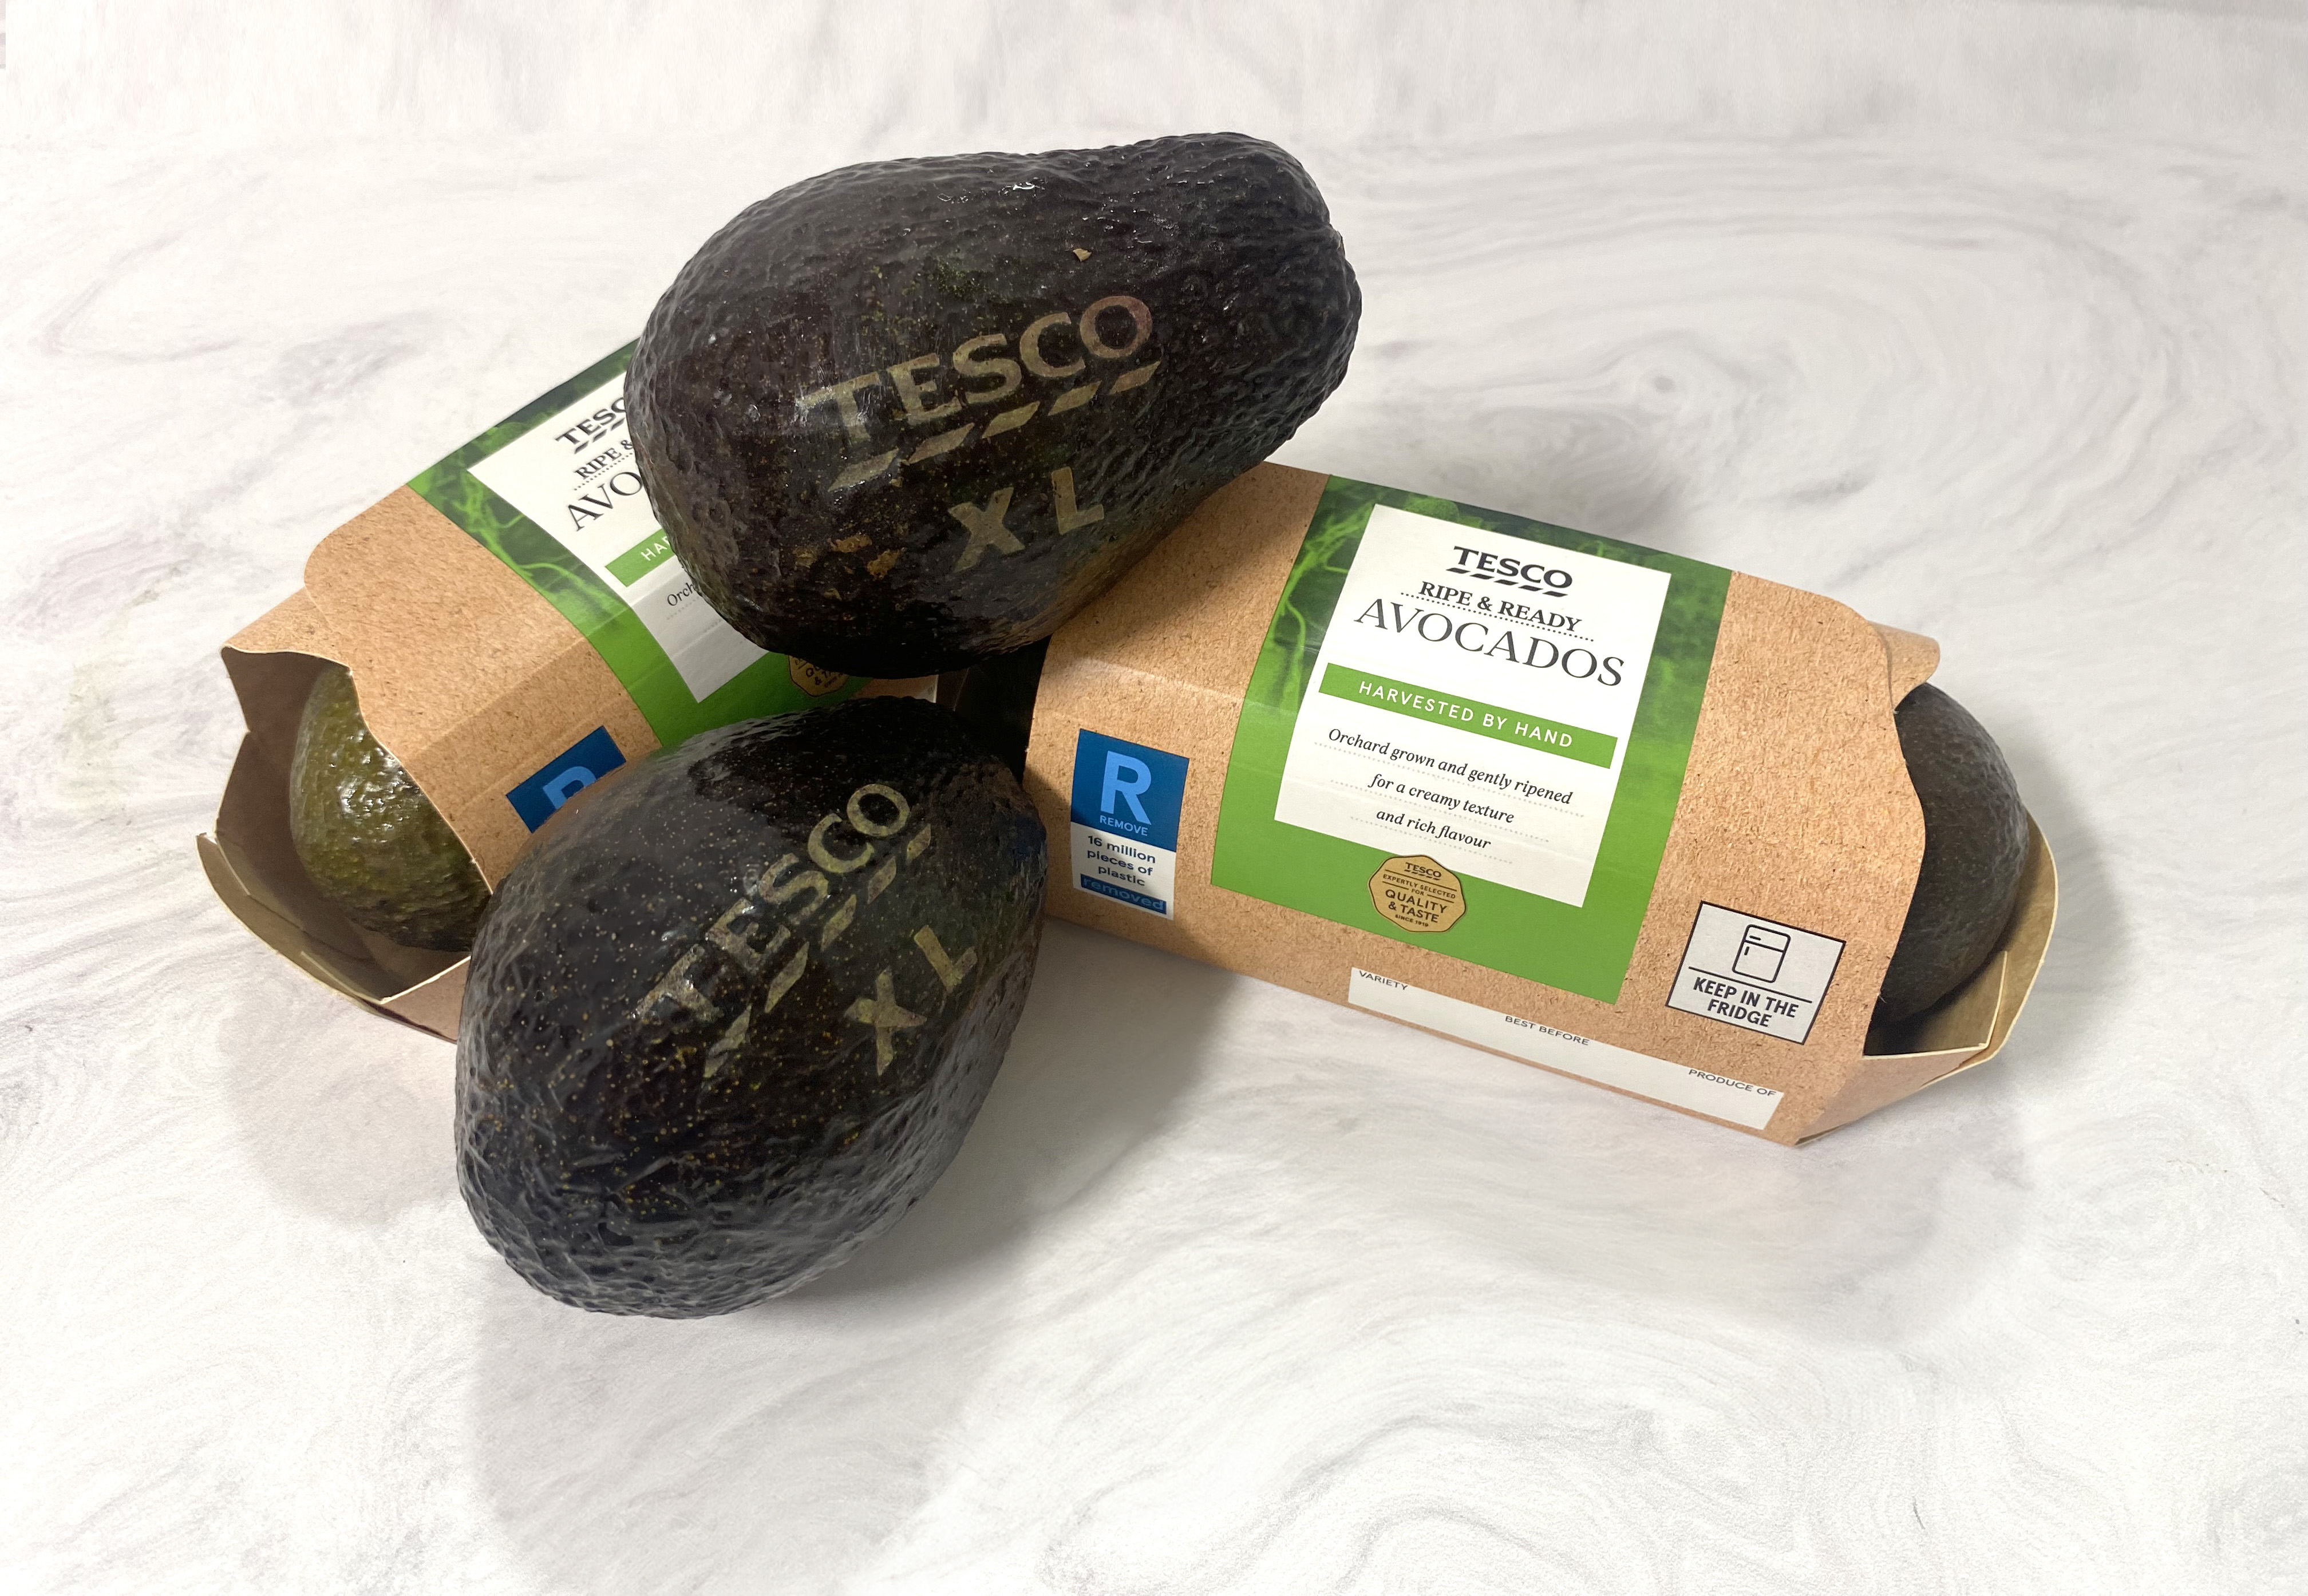 Tesco is to use laser-etchings on its extra large avocados instead of stickers in a trial designed to help the environment. (Tesco/ PA)